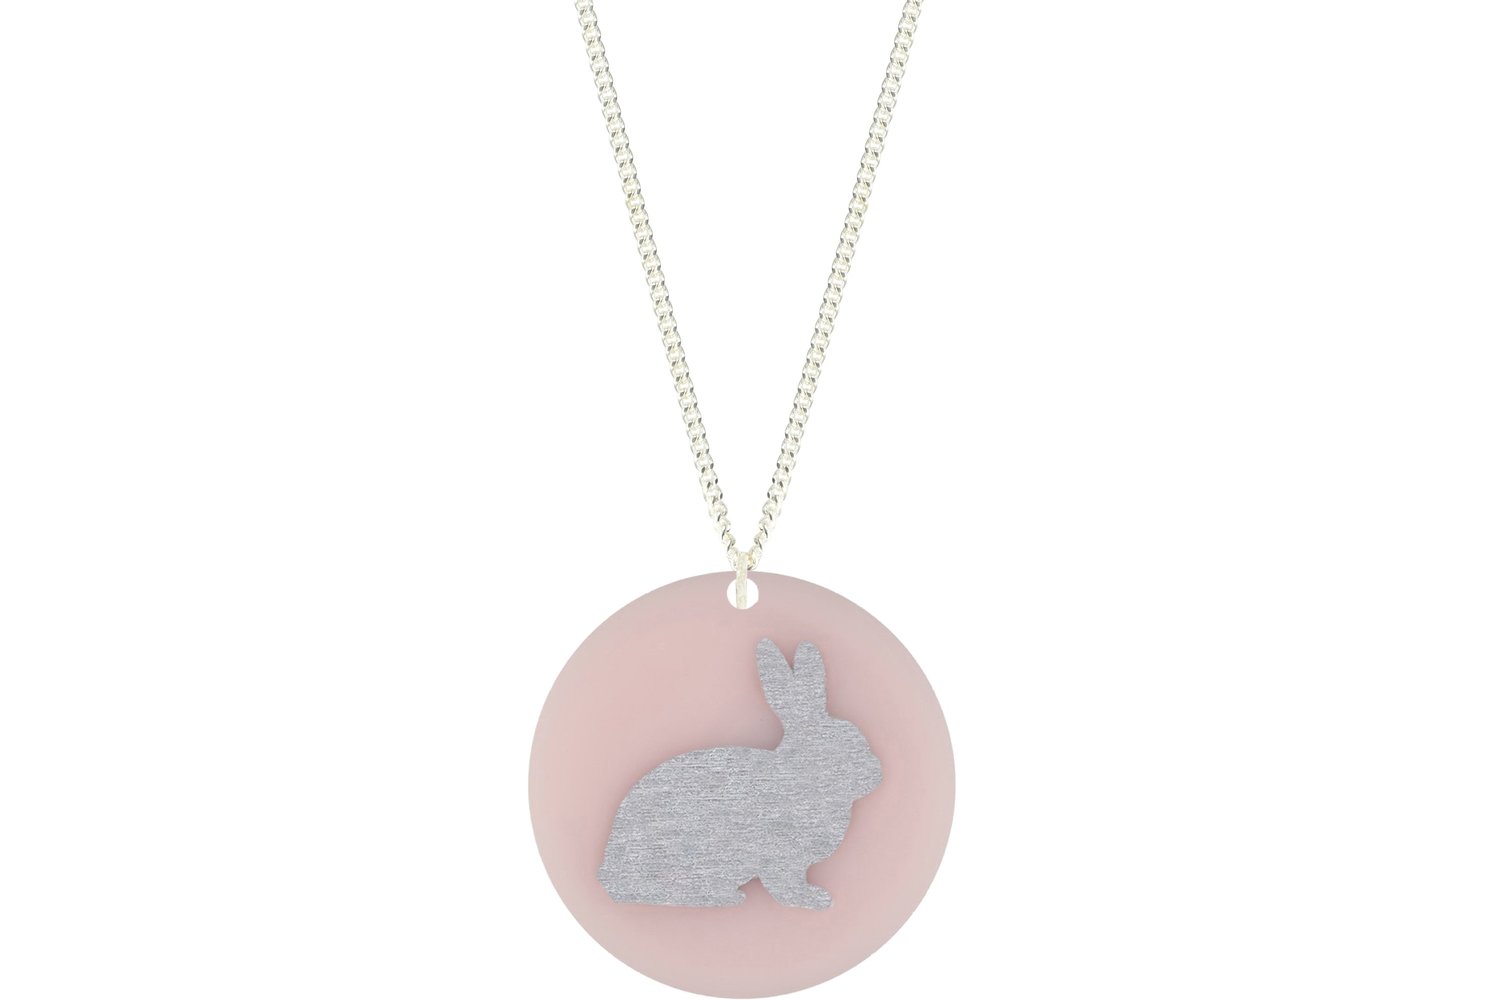 Bunny Pendant Subtle Style Refined with Paint on Chain Necklace